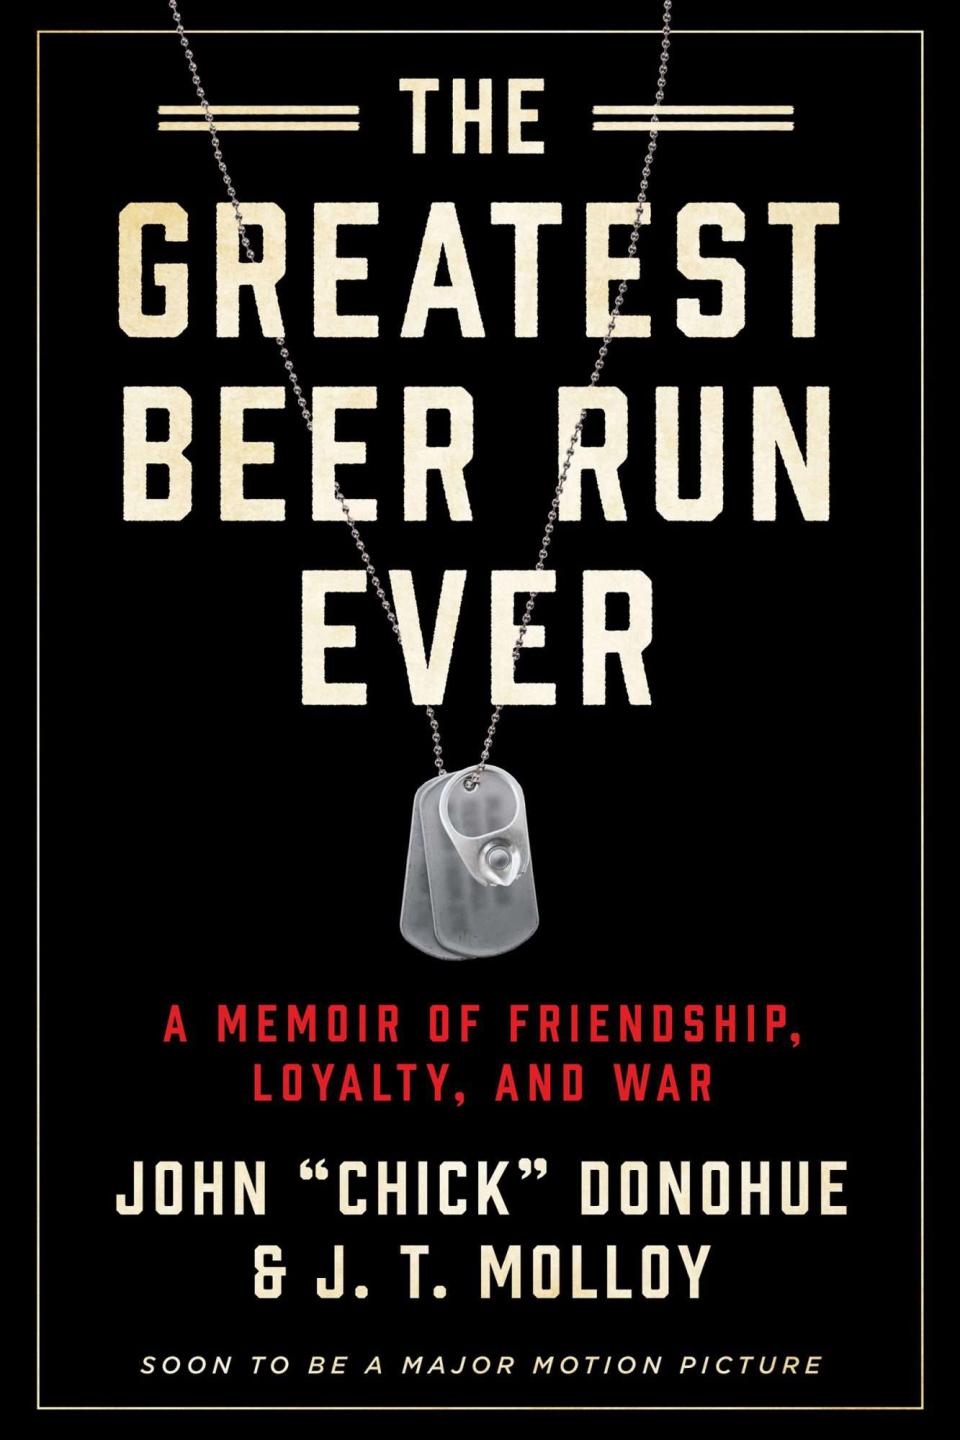 The Greatest Beer Run Ever by John 'Chick' Donohue